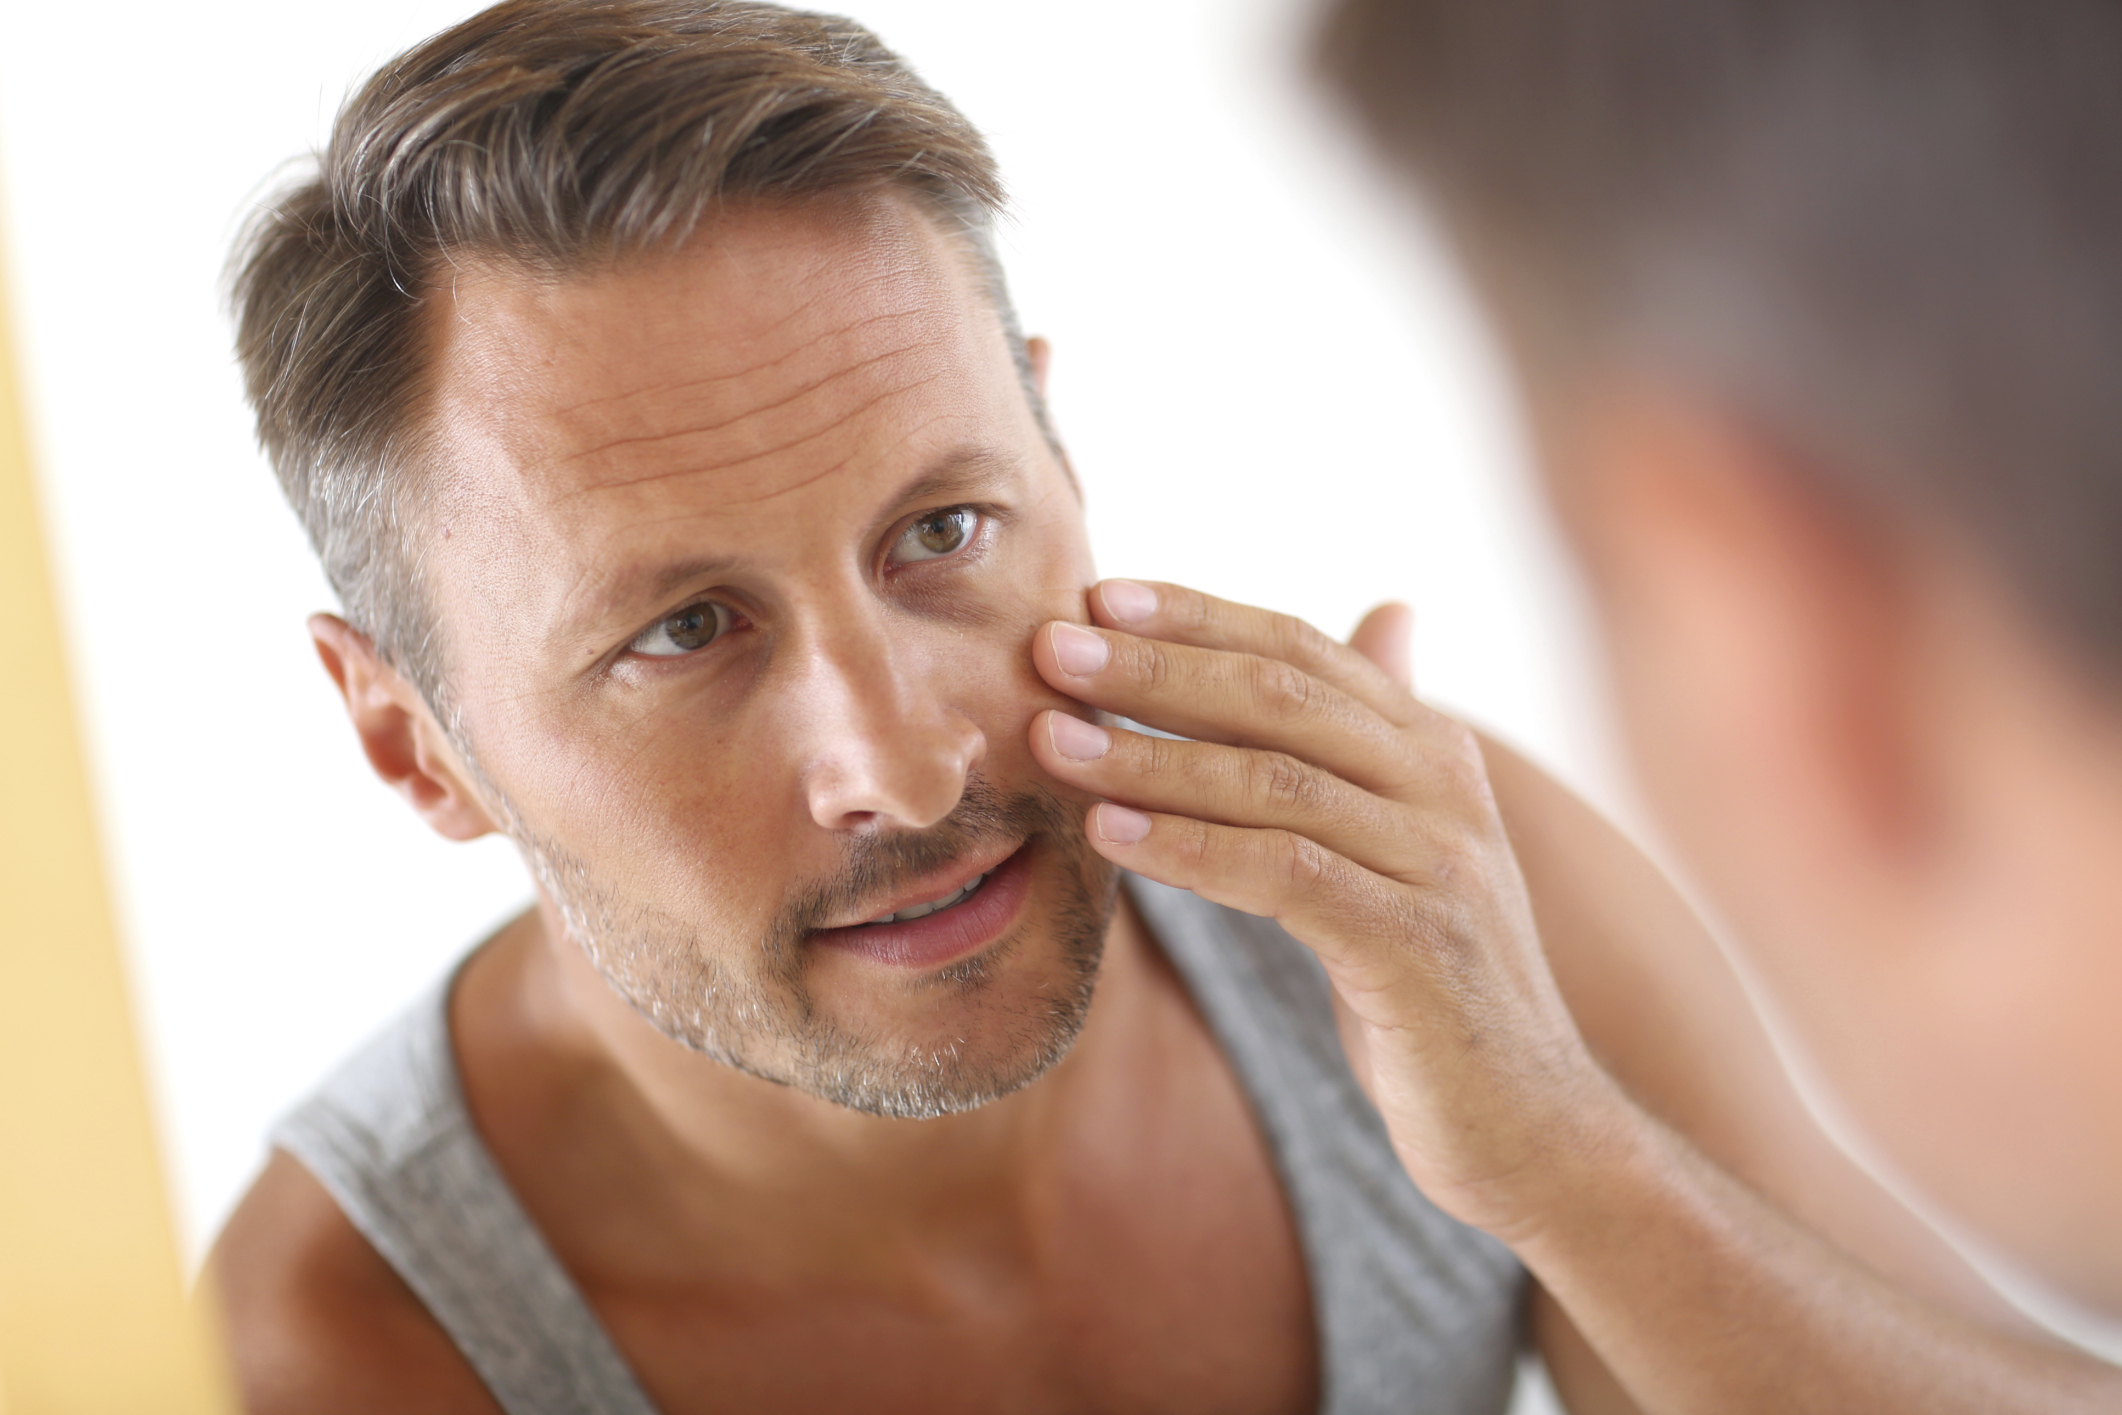 Gifts for Dad: The Woodruff Institute for Dermatology & Cosmetic Surgery Can Help!